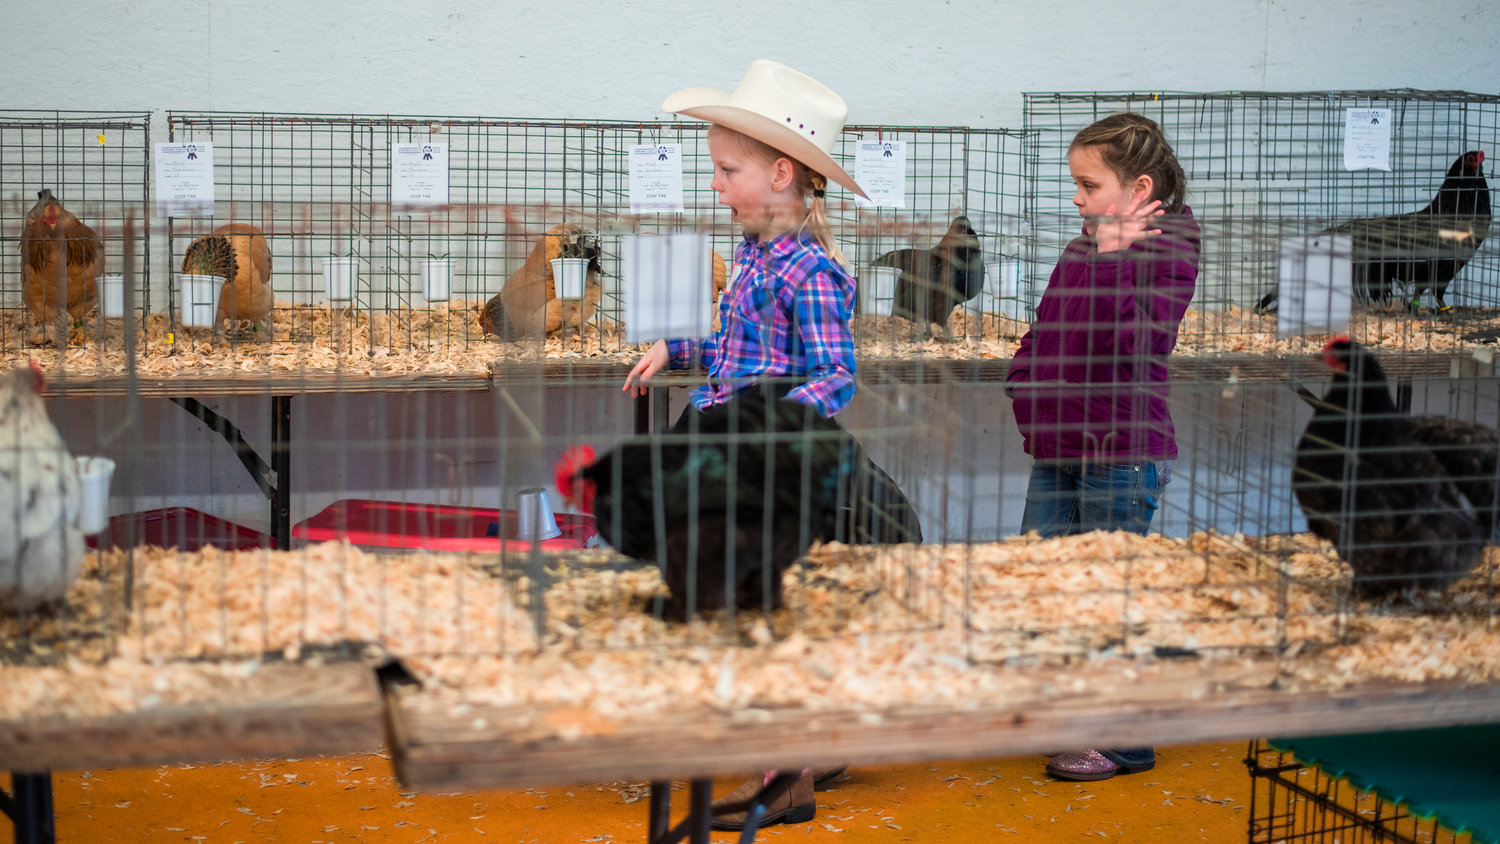 Girls walk through the Poultry Barn at the Southwest Washington Fairgrounds on Saturday during the Spring Youth Fair.